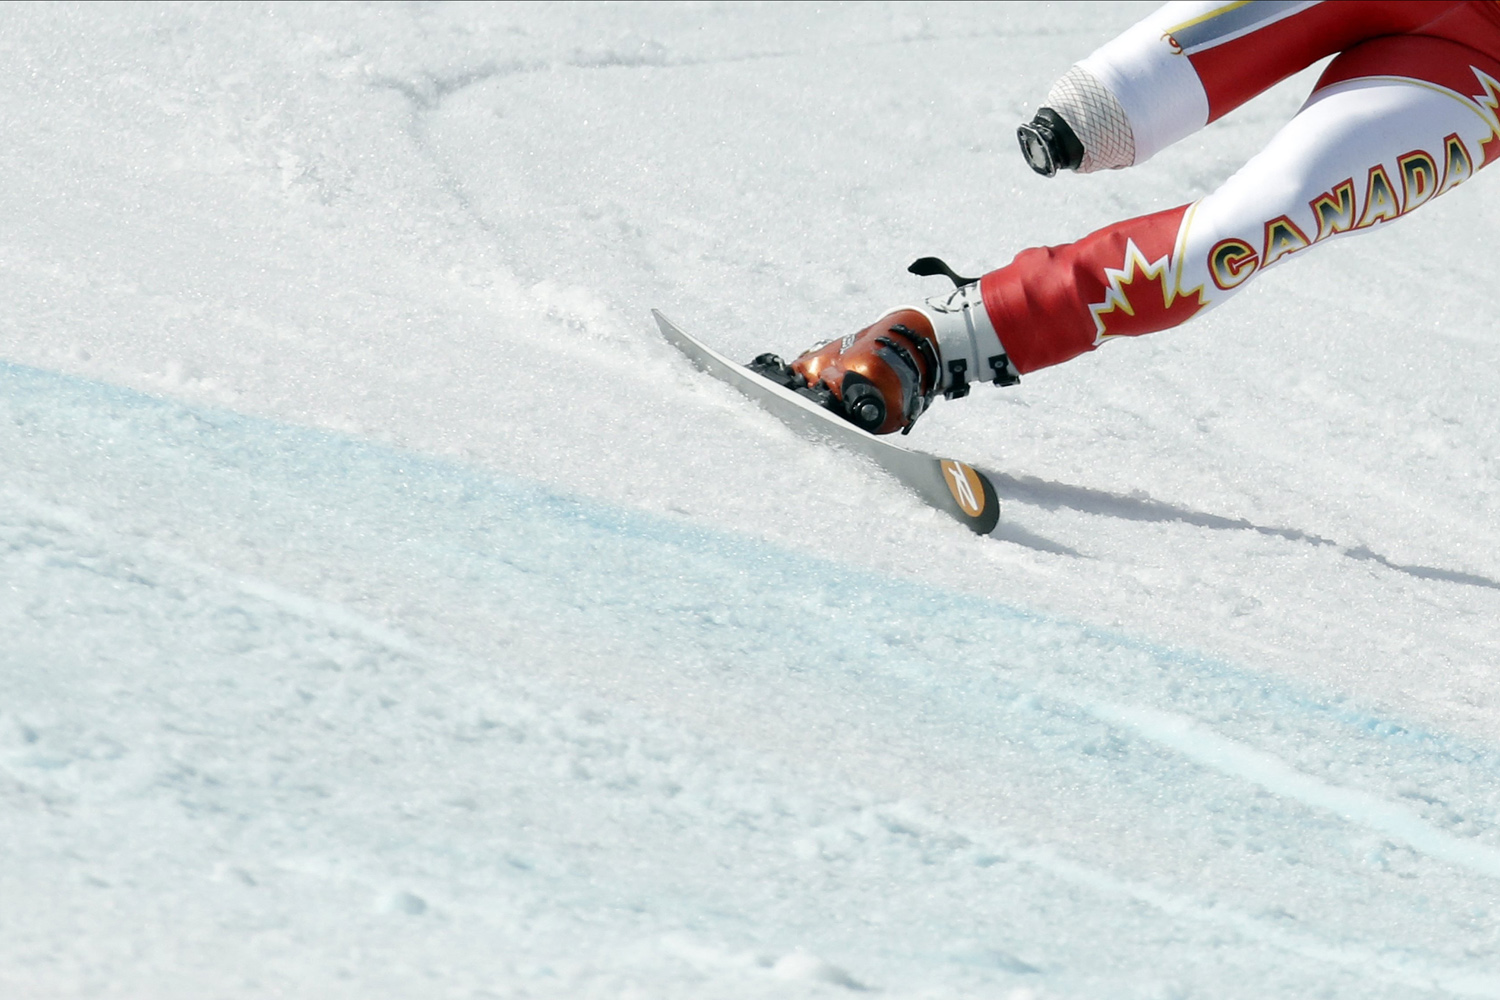 Canada's Luscombe skis during the Men's Downhill Standing training at the 2014 Sochi Paralympic Winter Games at the Rosa Khutor Alpine Center